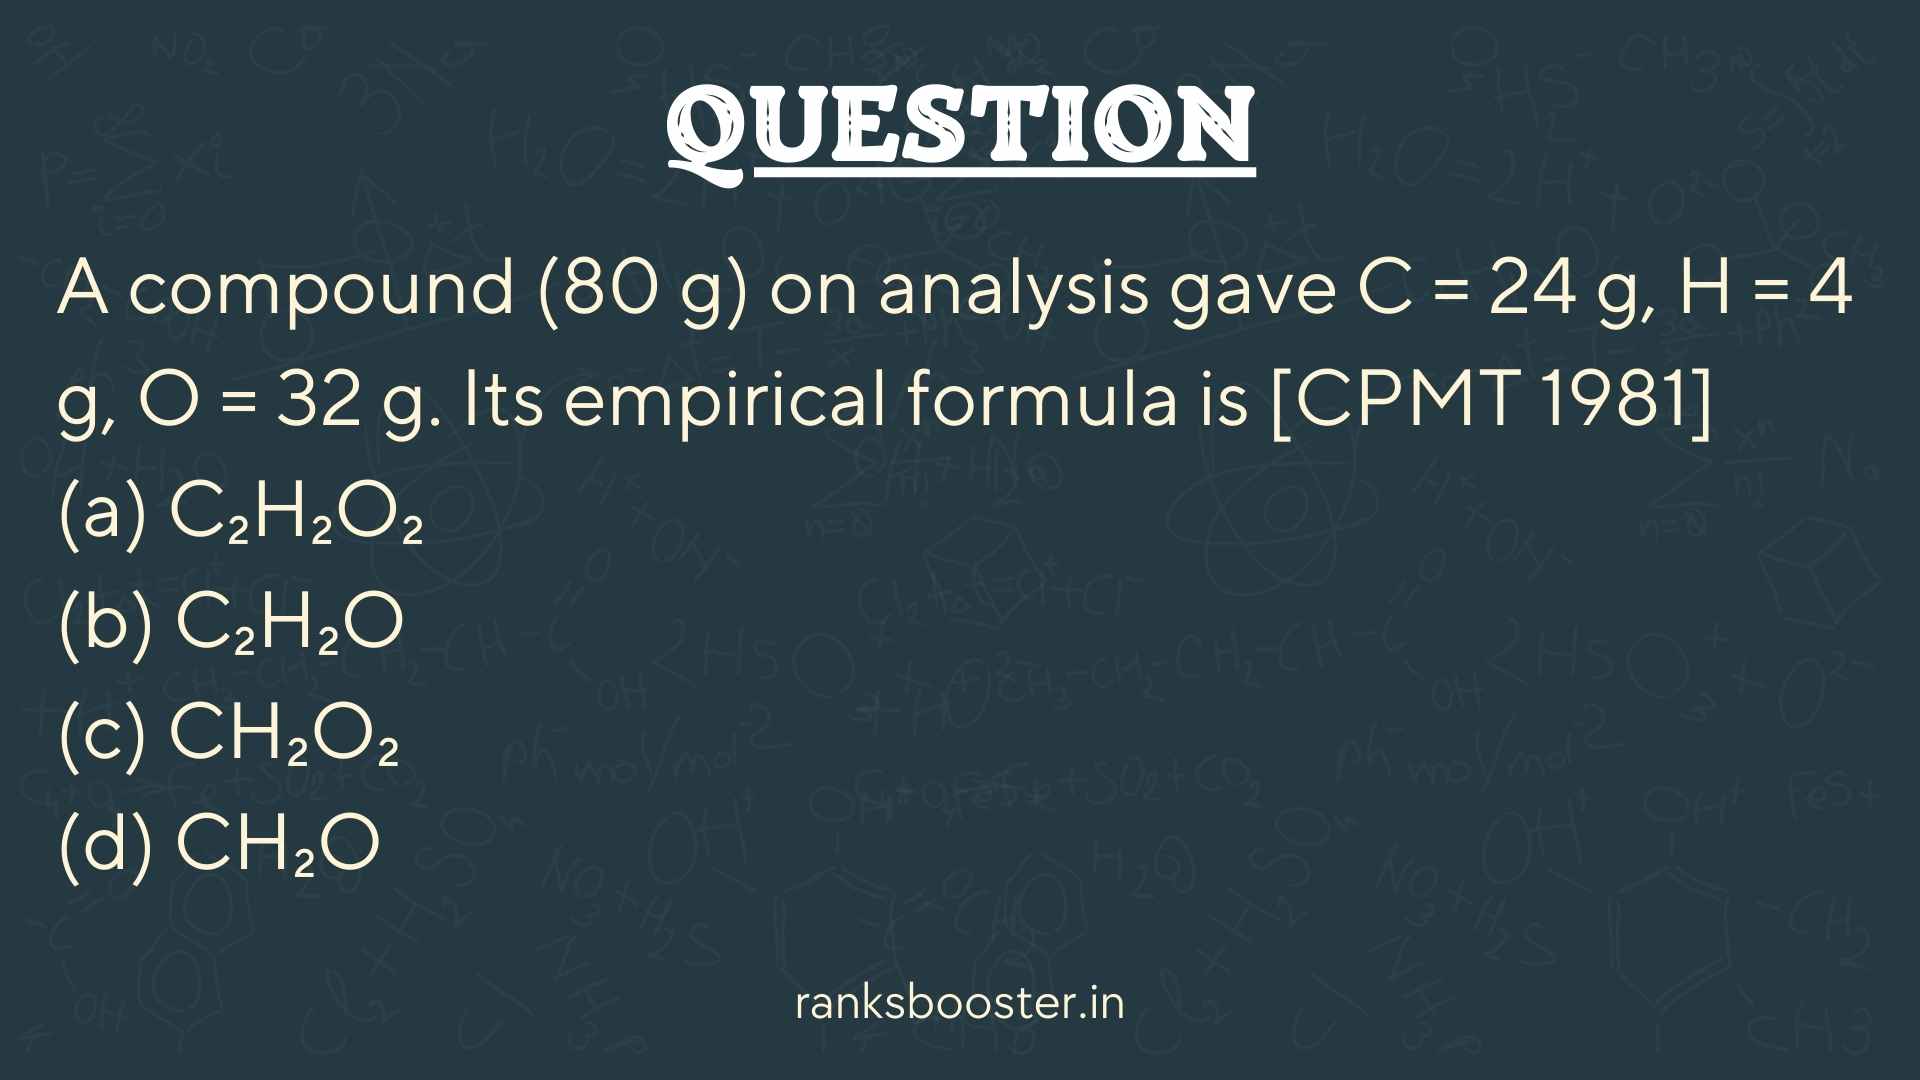 Question: A compound (80 g) on analysis gave C = 24 g, H = 4 g, O = 32 g. Its empirical formula is [CPMT 1981] (a) C₂H₂O₂ (b) C₂H₂O (c) CH₂O₂ (d) CH₂O